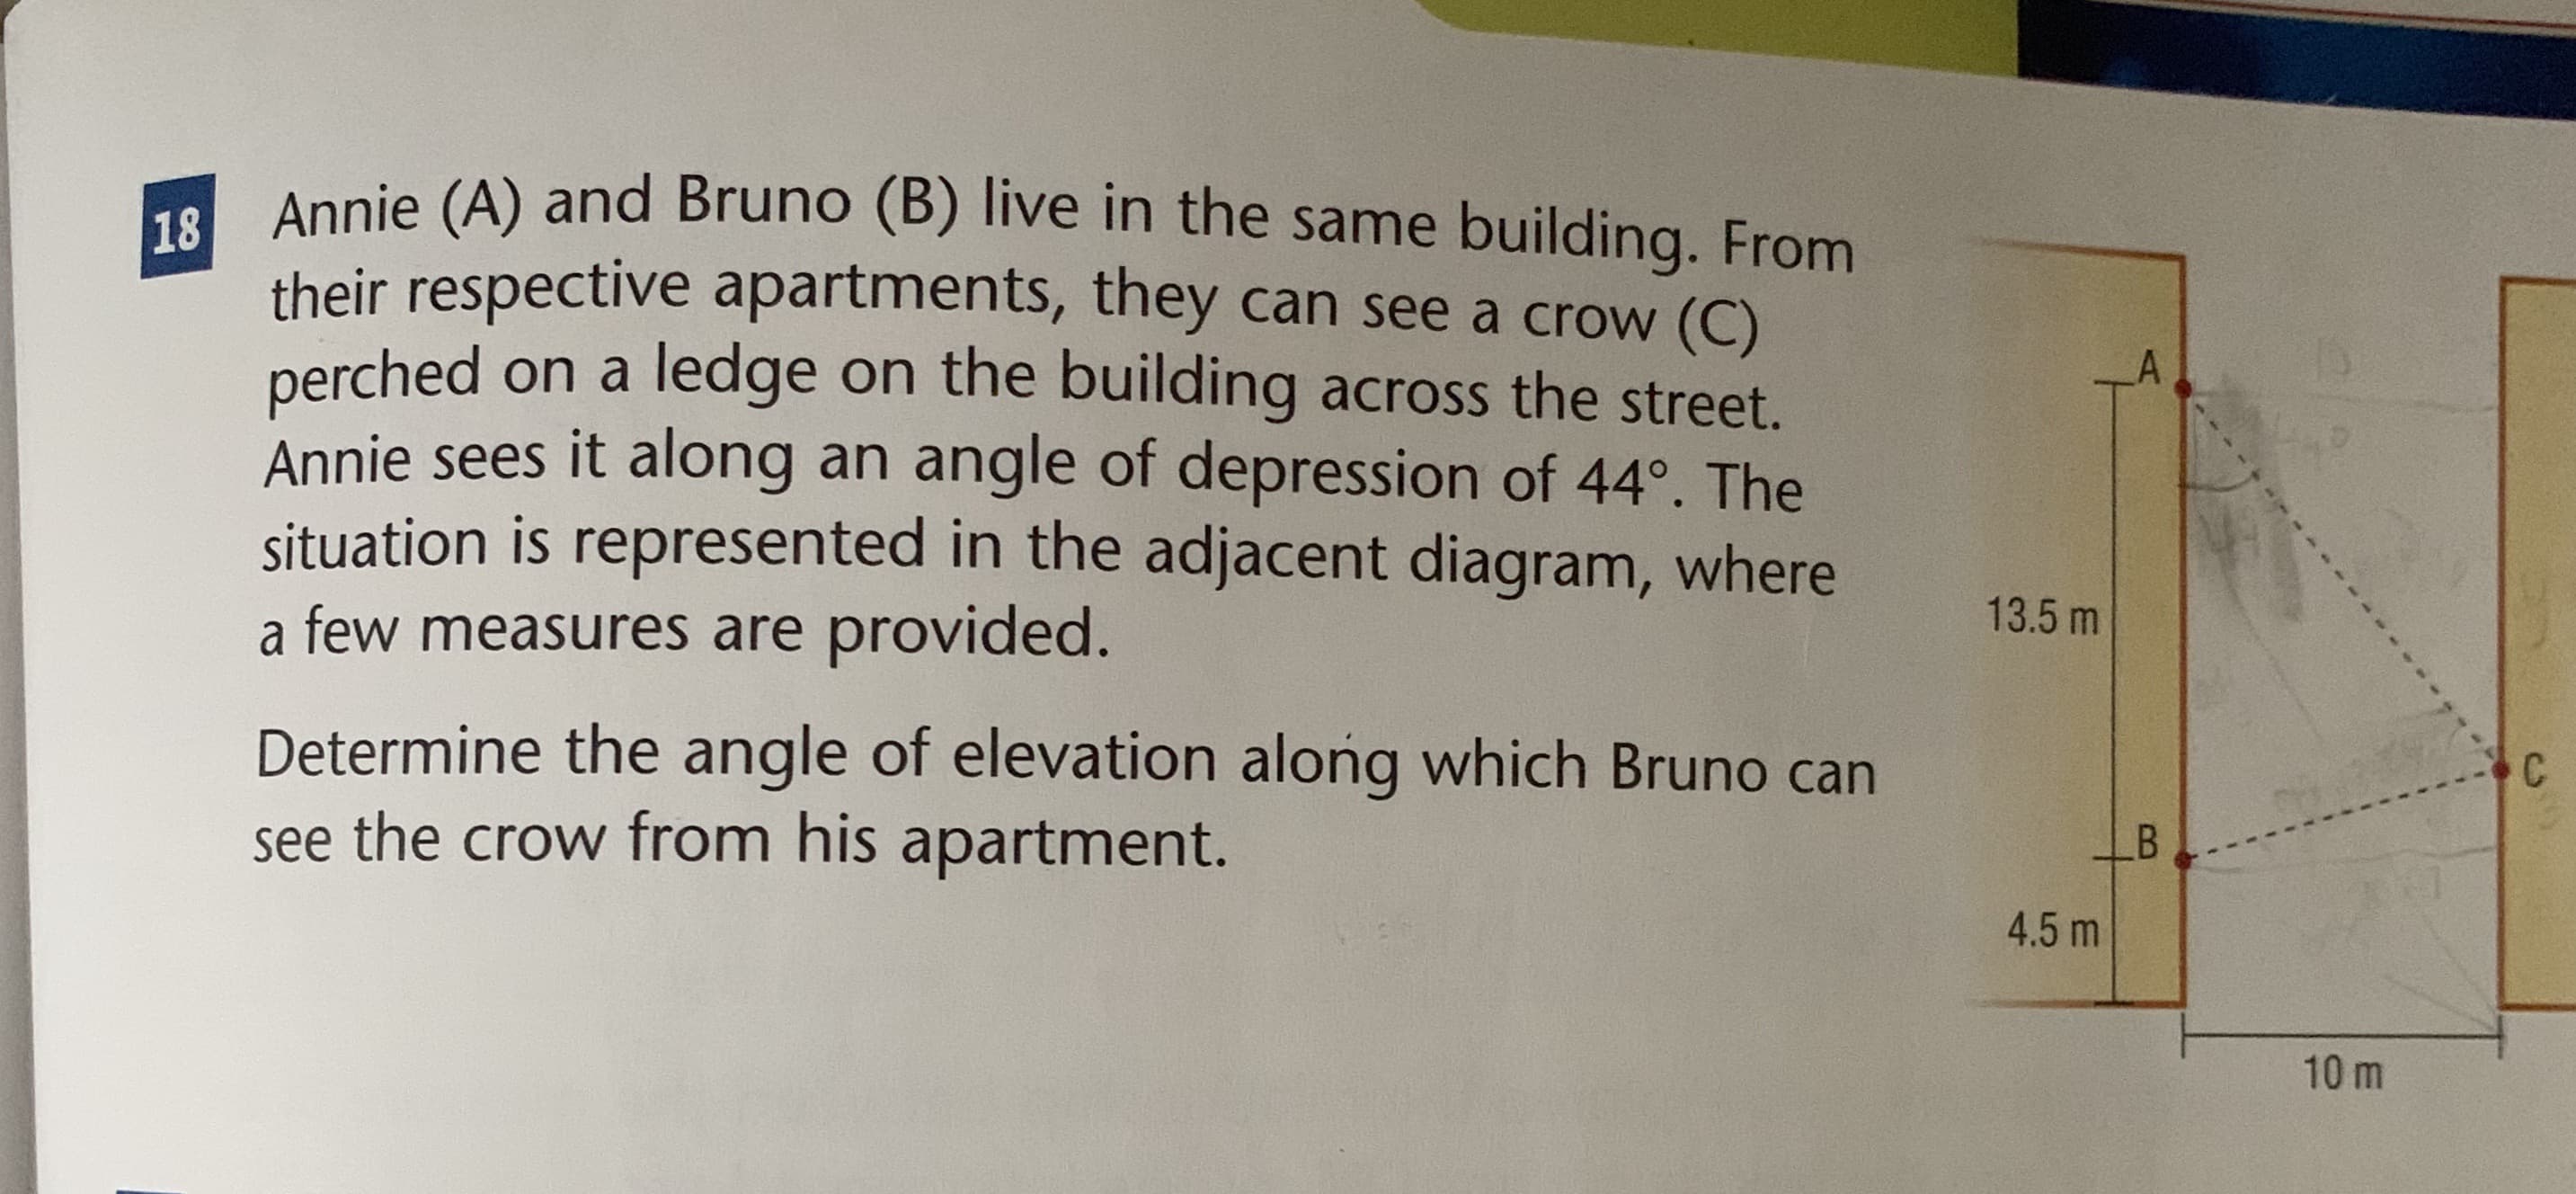 Annie (A) and Bruno (B) live in the same building. From
their respective apartments, they can see a crow (C)
perched on a ledge on the building across the street.
Annie sees it along an angle of depression of 44°. The
situation is represented in the adjacent diagram, where
a few measures are provided.
13.5 m
Determine the angle of elevation along which Bruno can
C
see the crow from his apartment.
4.5 m
10 m
B
